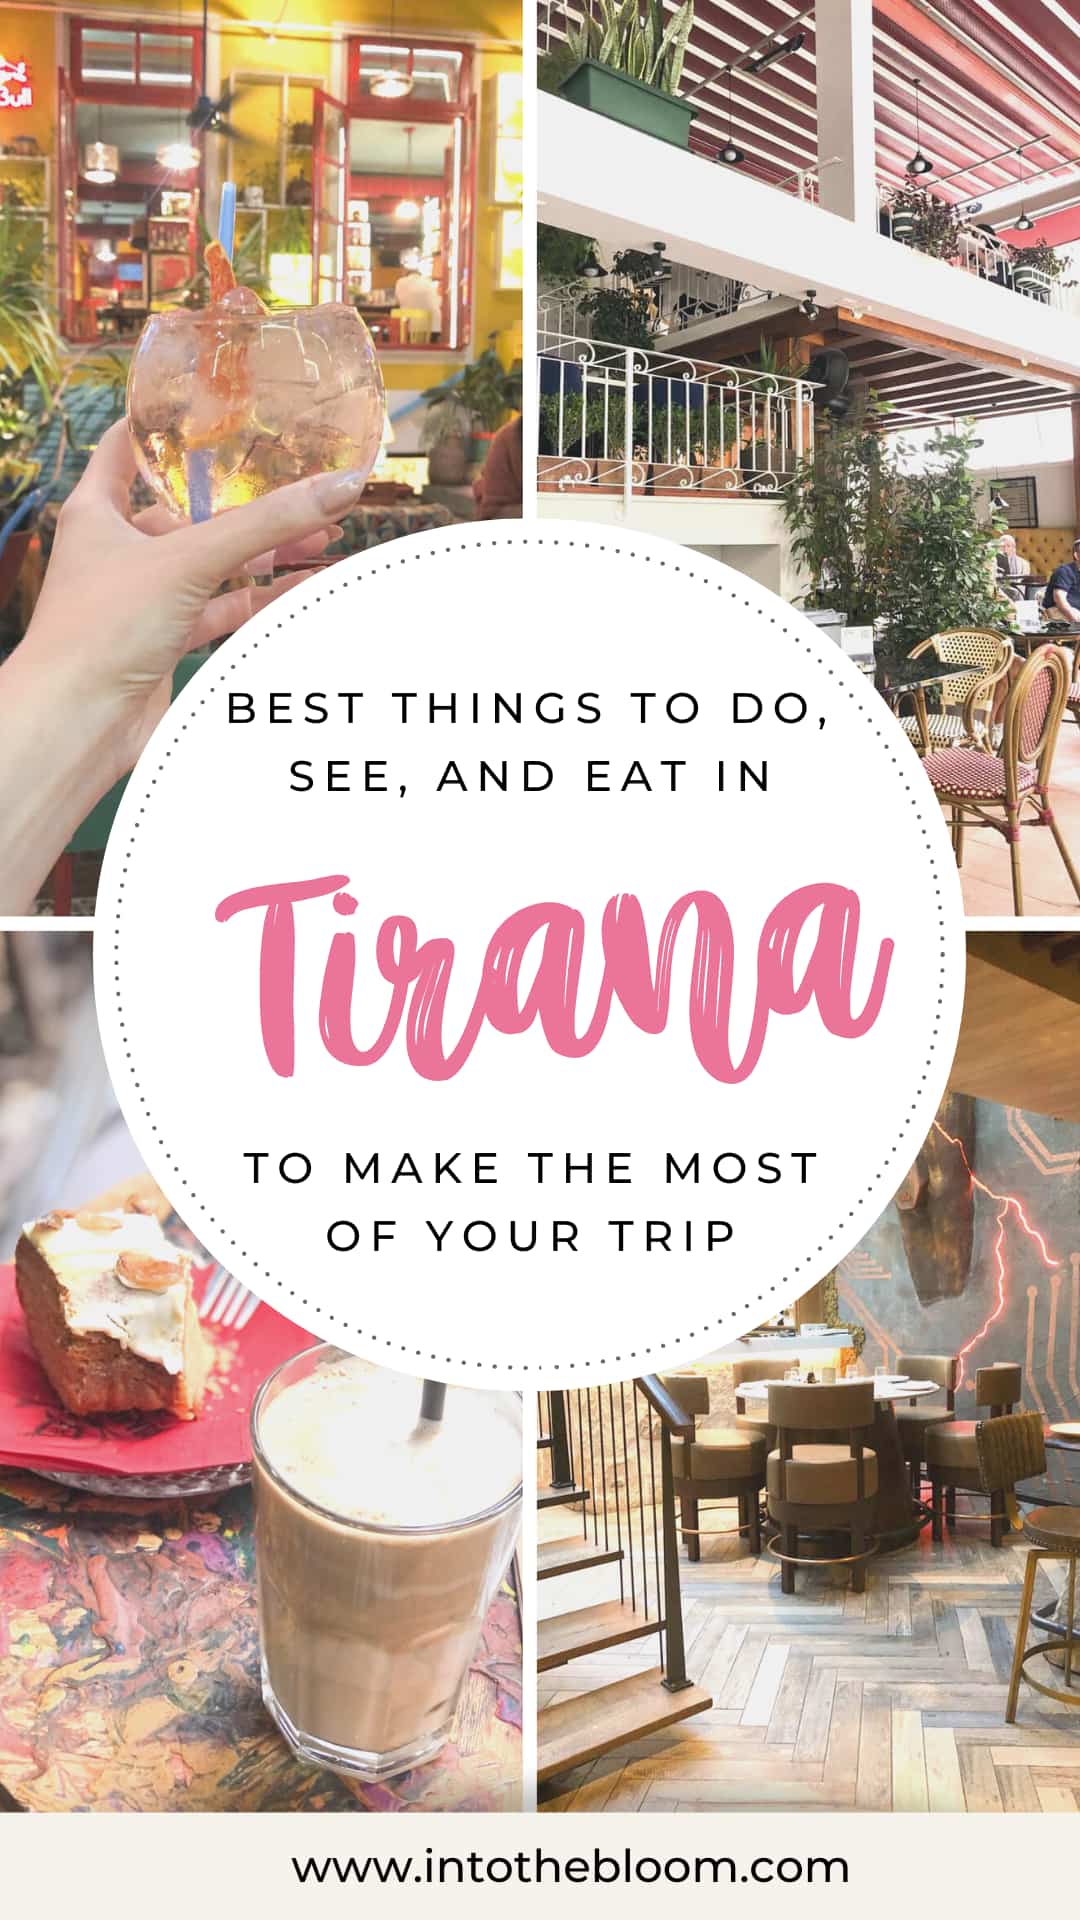 Tirana travel guide - Best things to do, see, and eat in Tirana, Albania